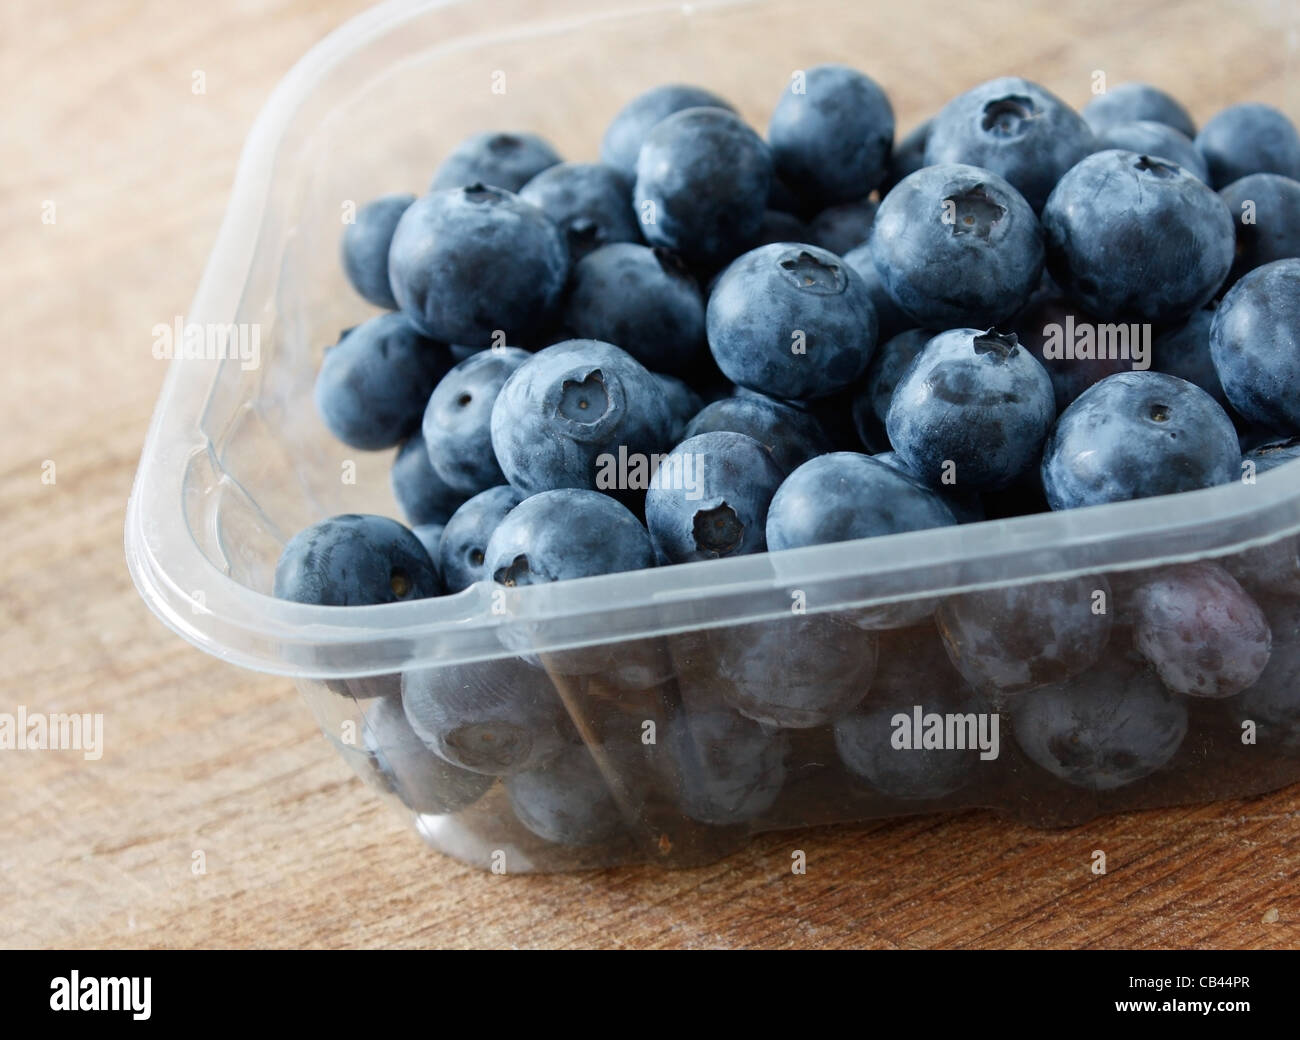 Blueberries photographed in a studio Stock Photo